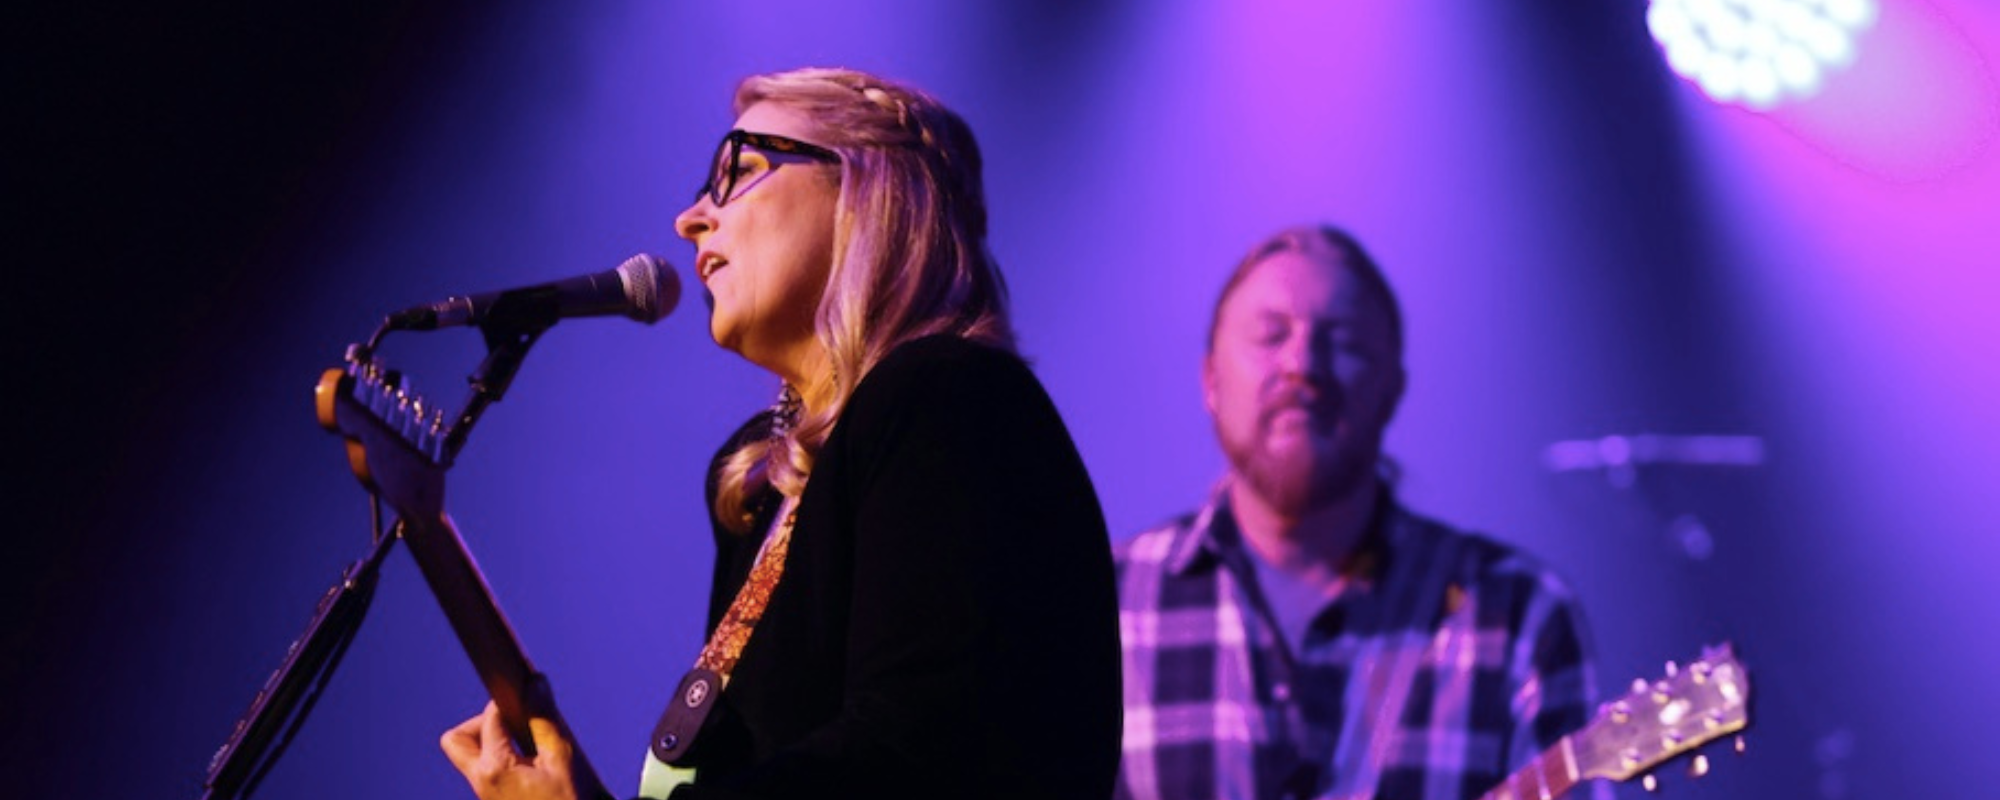 Tedeschi Trucks Band to Open for Eagles Instead of Steely Dan at Two Atlanta Shows This Week